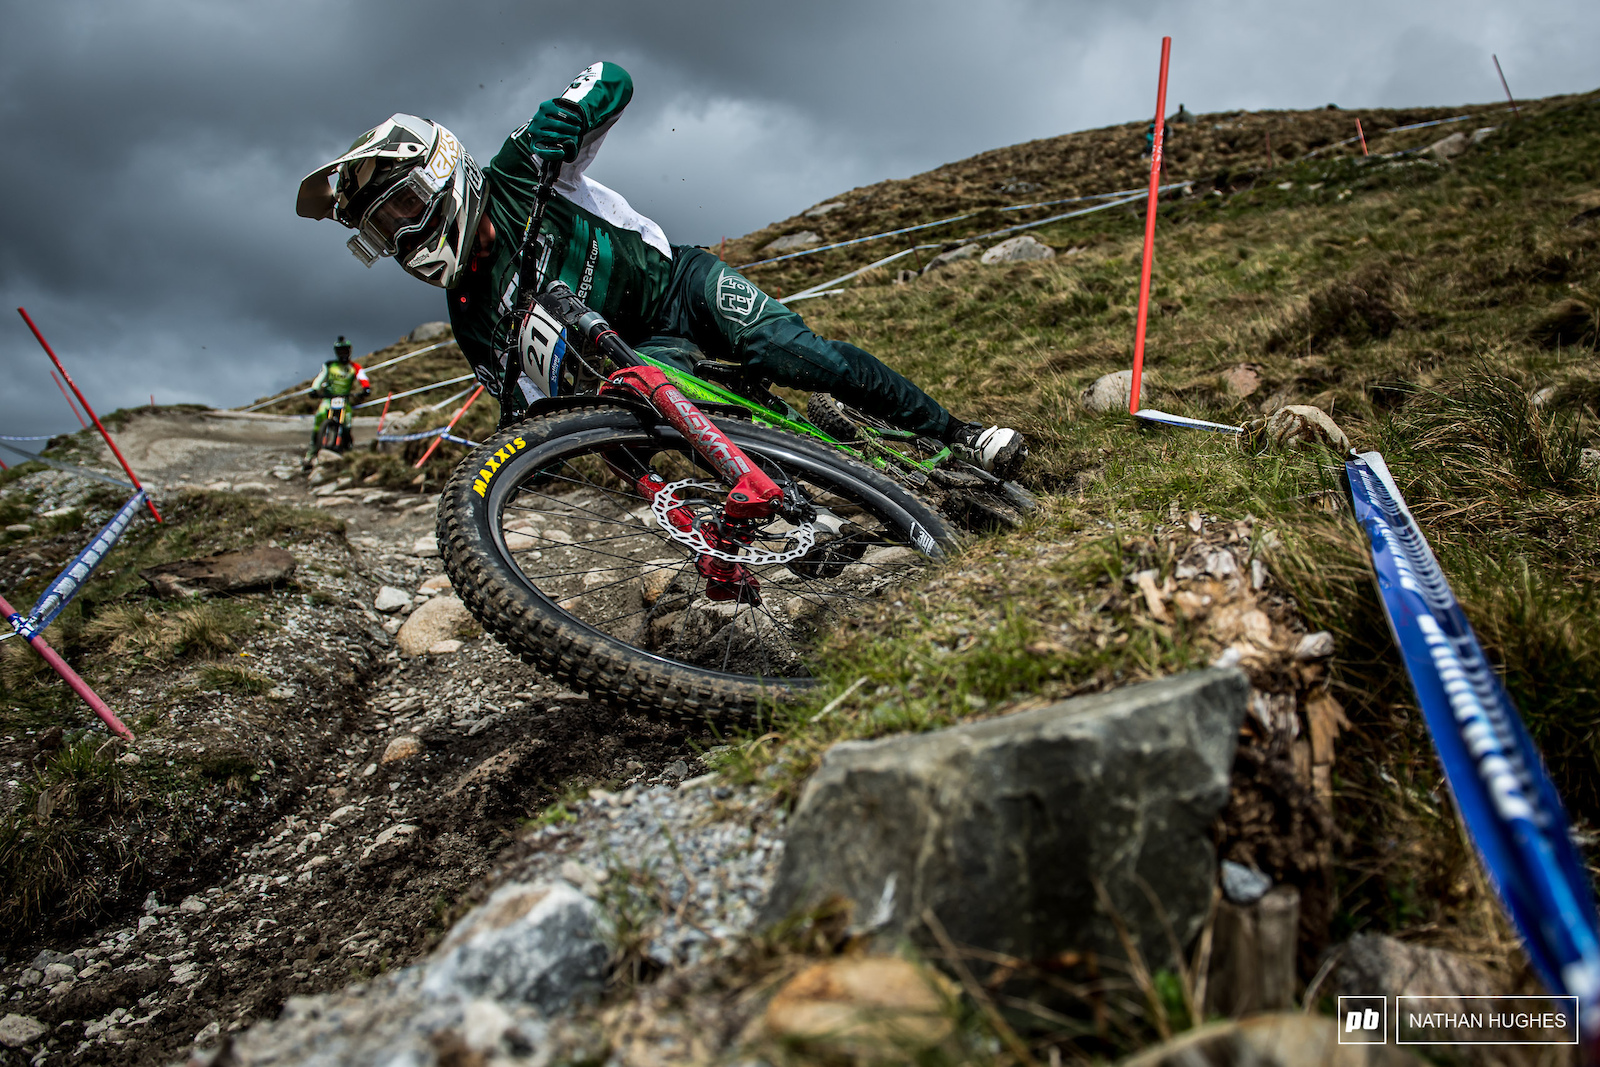 Taylor Vernon had cracking Lourdes and backed it up with a great result at the UK national here last week.